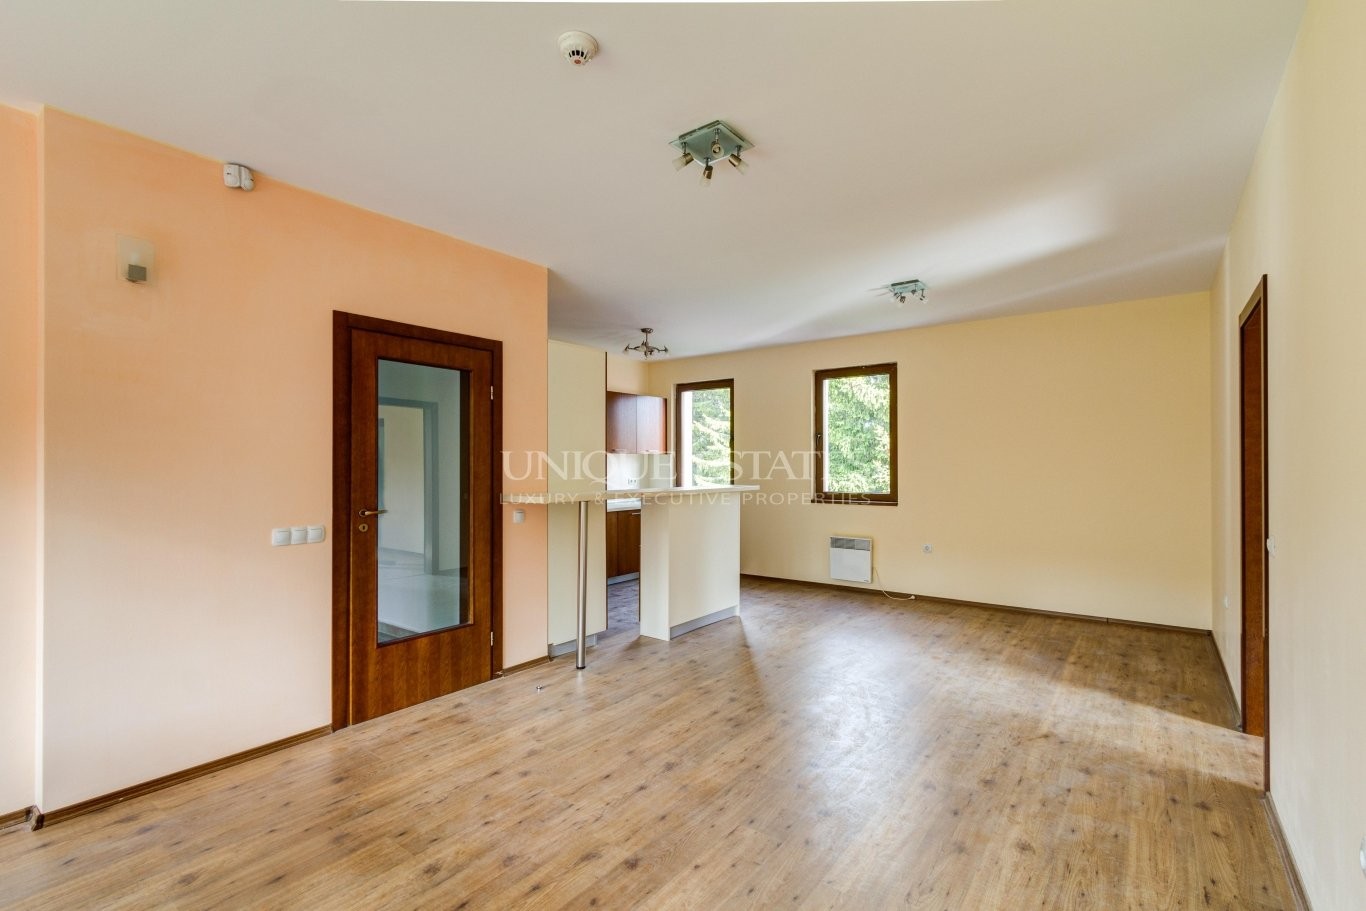 Hotel / Apartment house for sale in Sofia, Natiolan park Vitosha with listing ID: K6145 - image 4